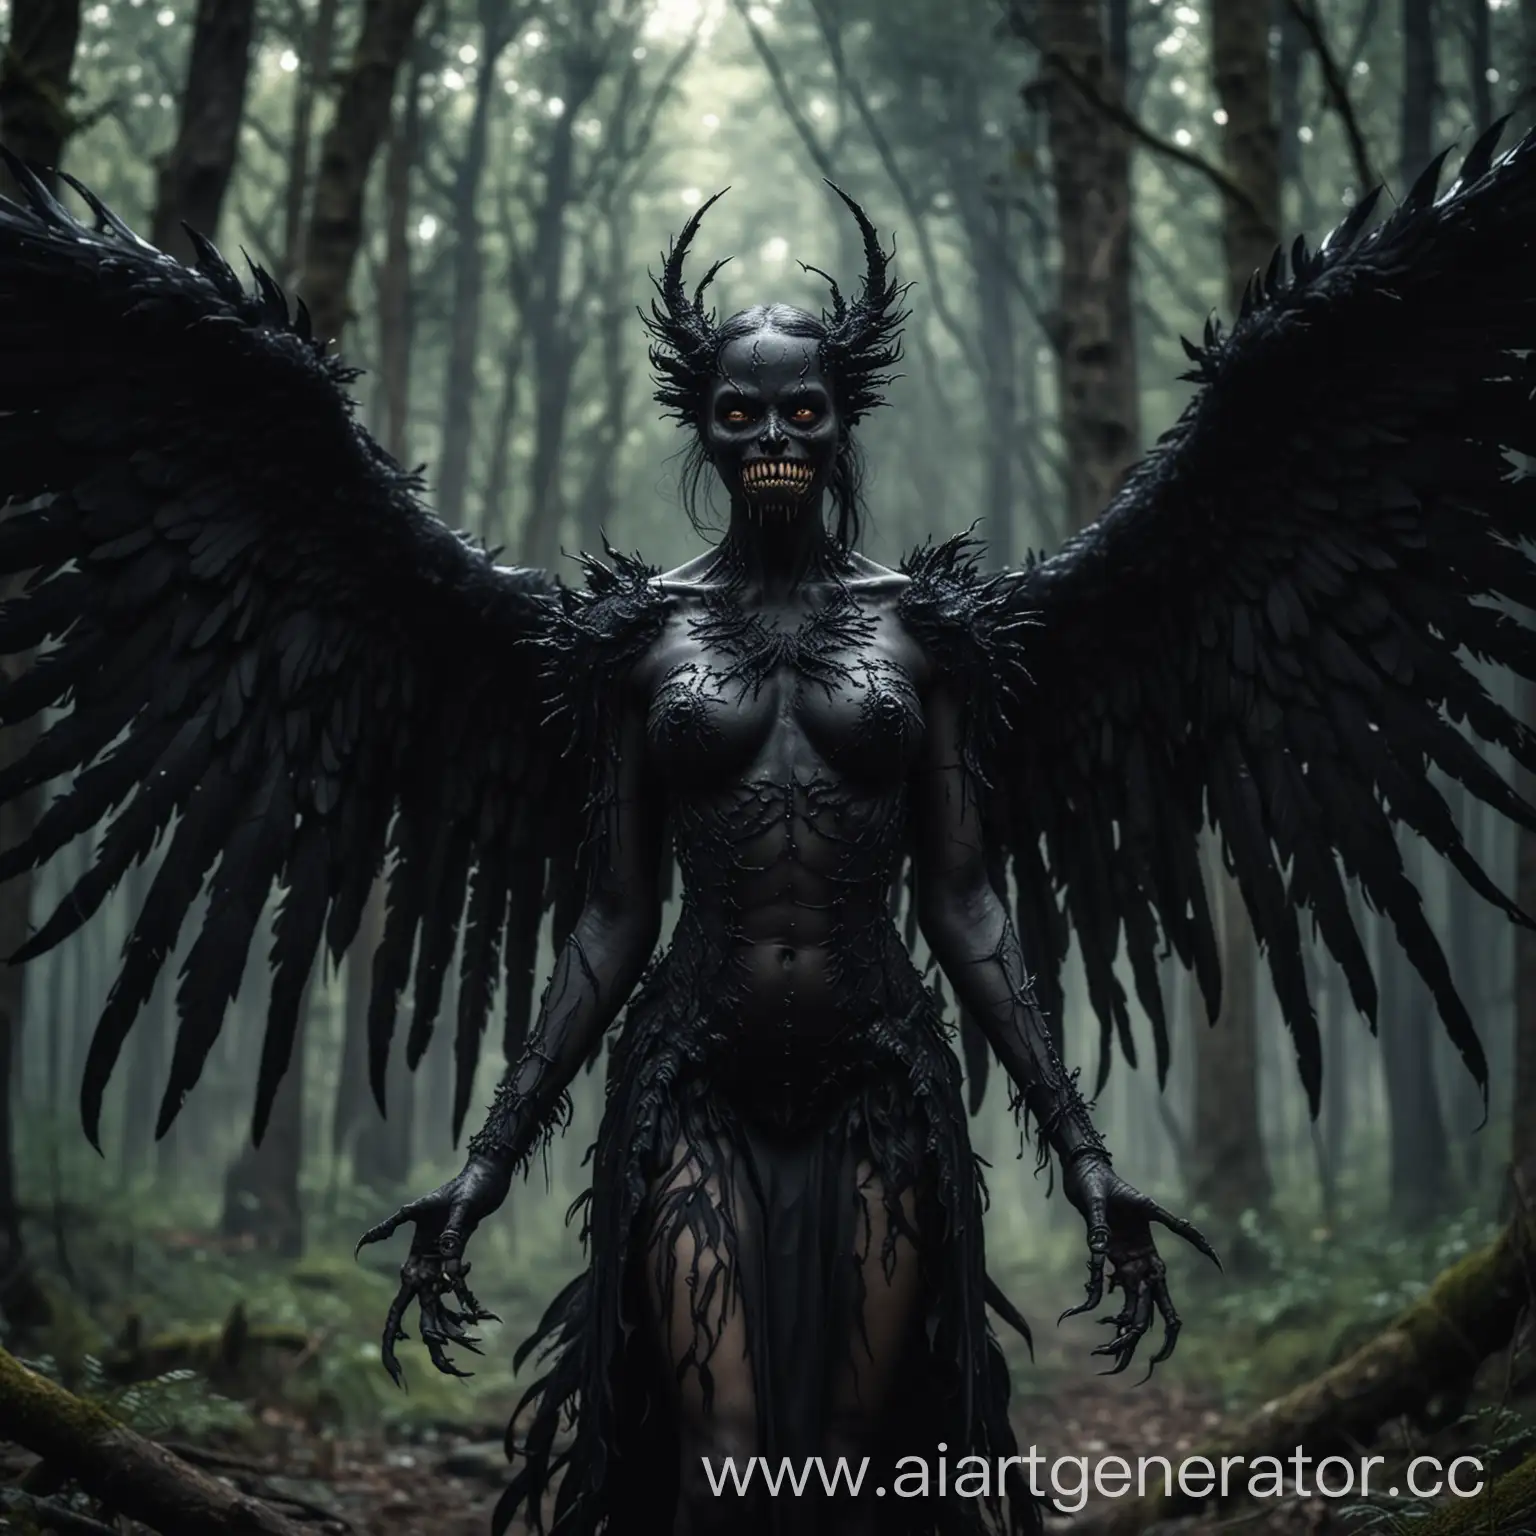 Sinister-Black-Angel-Monster-with-Multiple-Eyes-and-Four-Wings-in-Dark-Forest